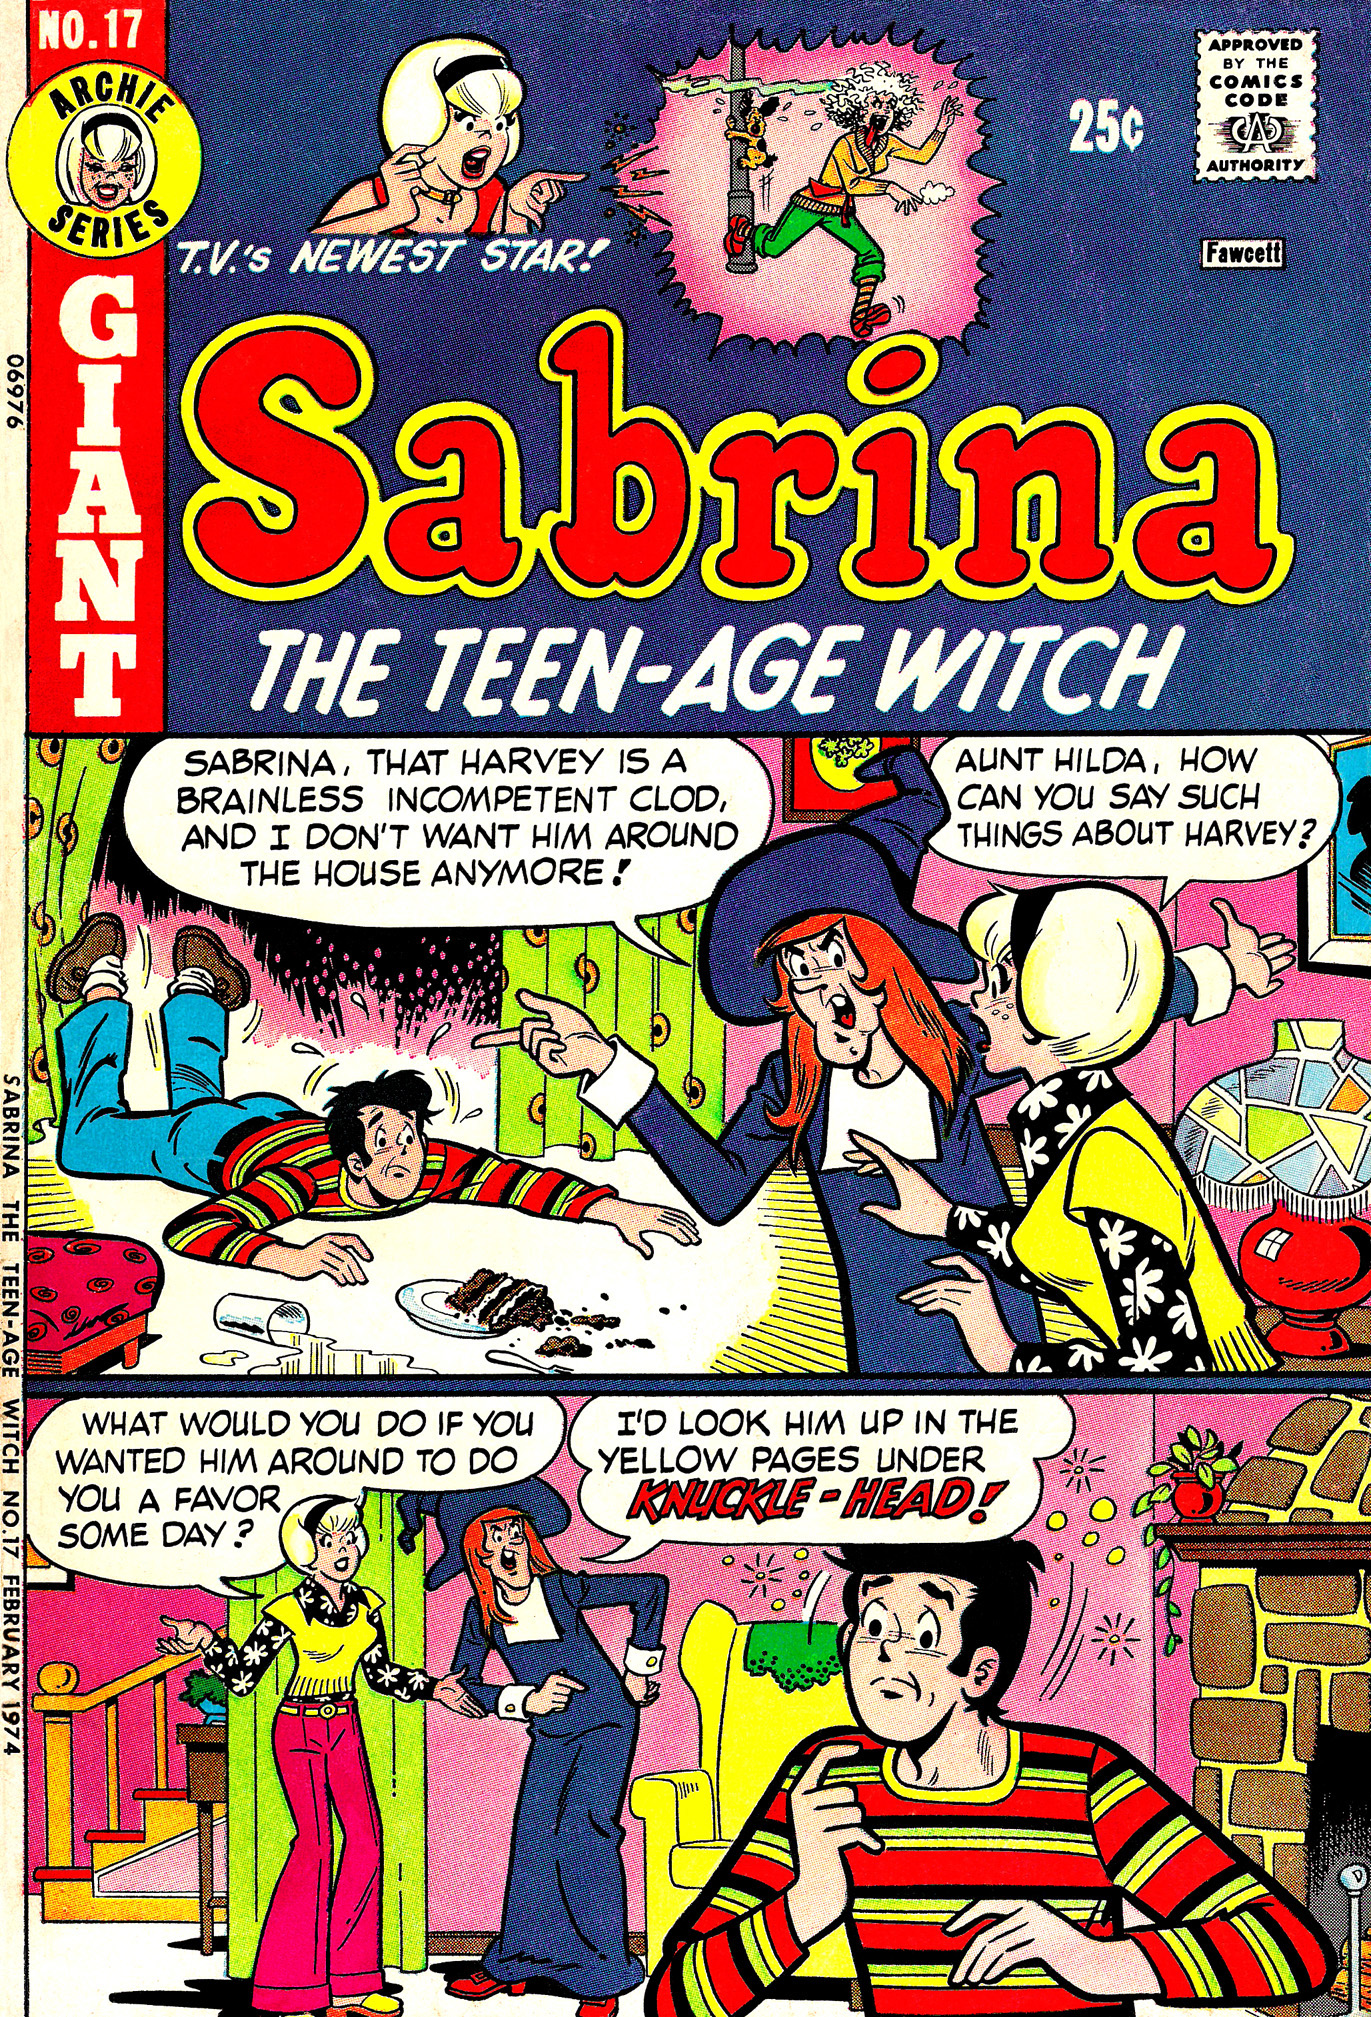 Sabrina The Teenage Witch (1971) Issue #17 #17 - English 1